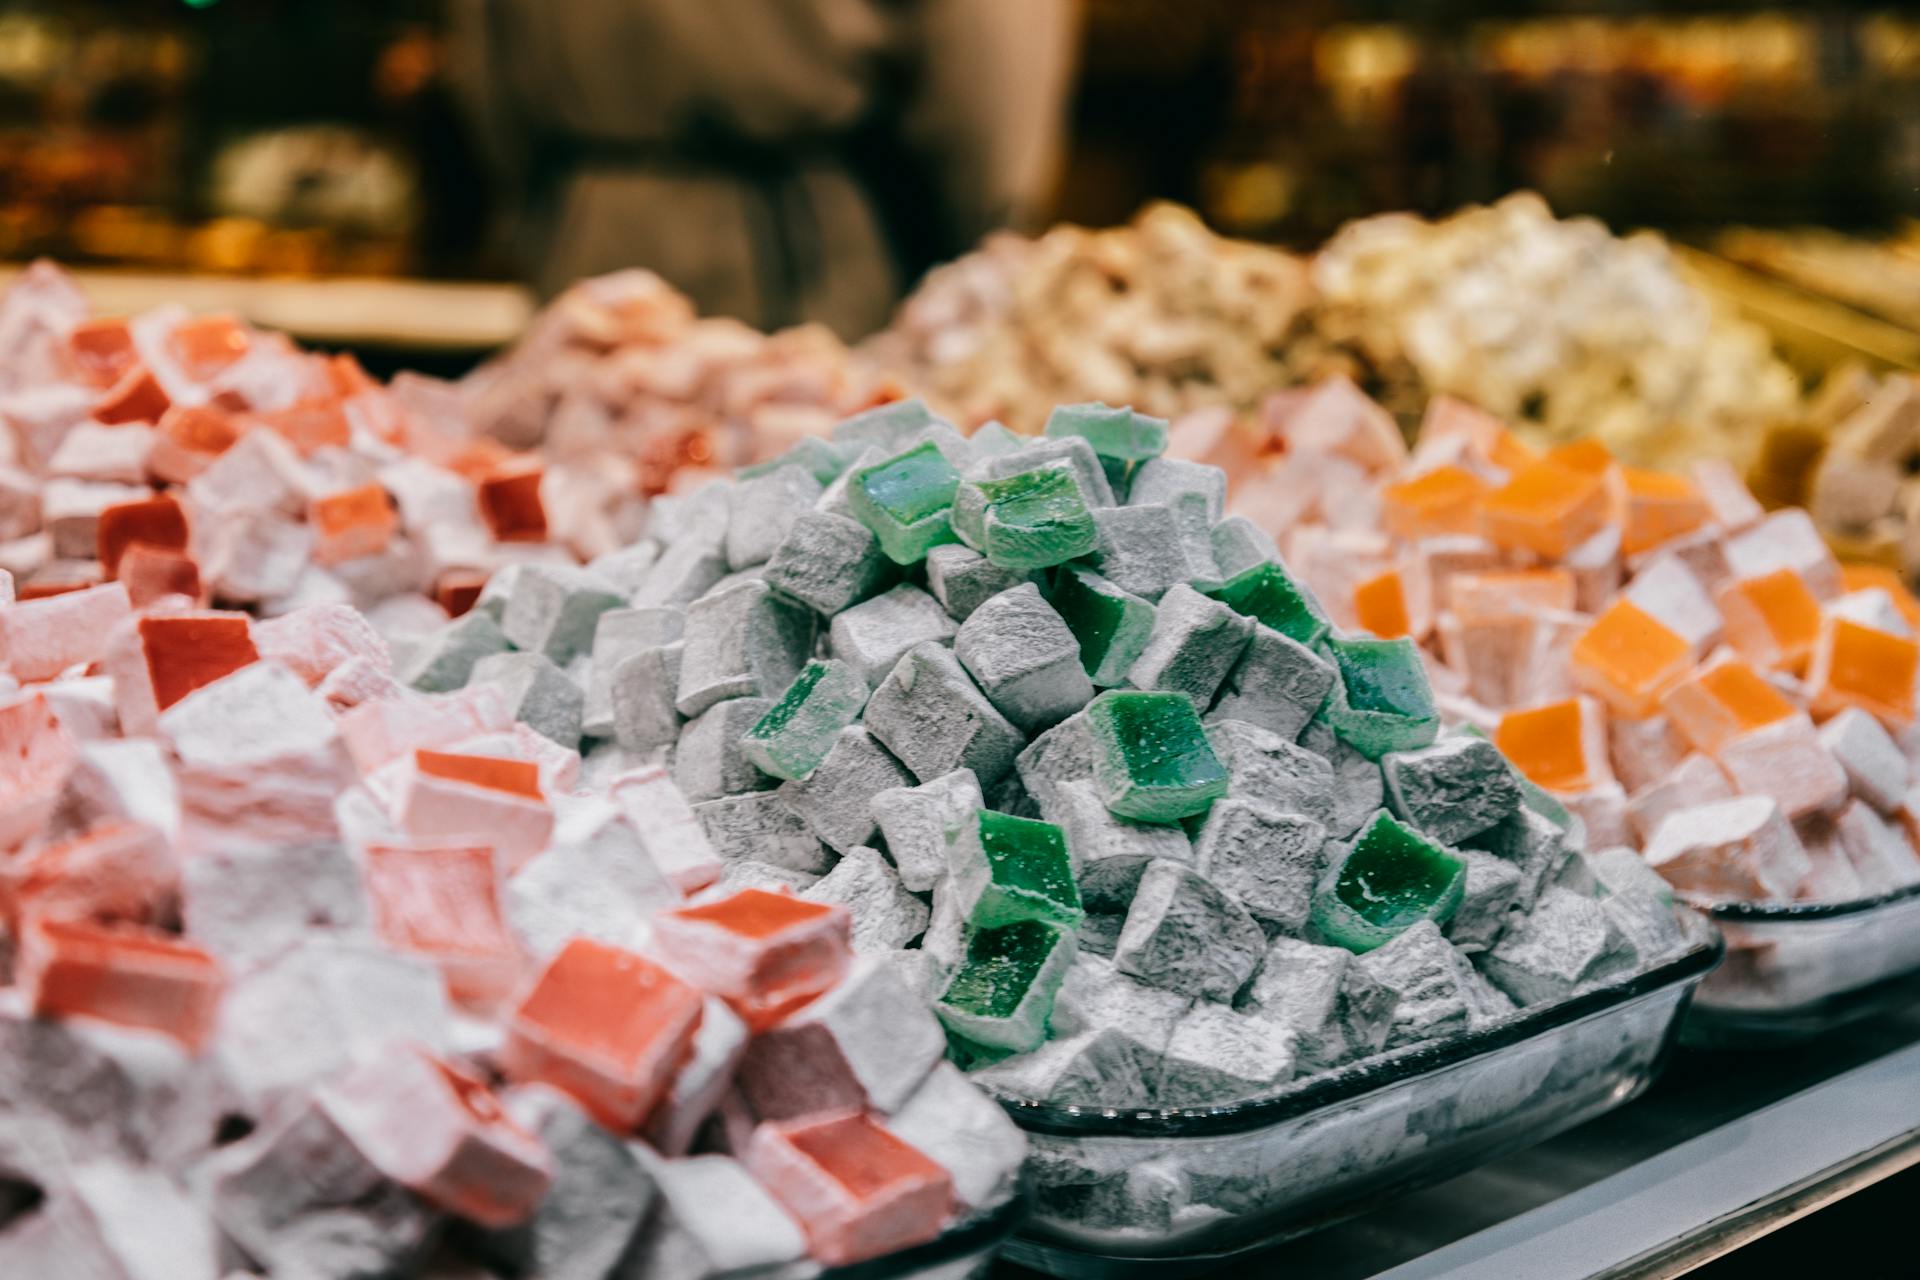 Assortment of sugar starch cubes sprinkled with powdered sugar